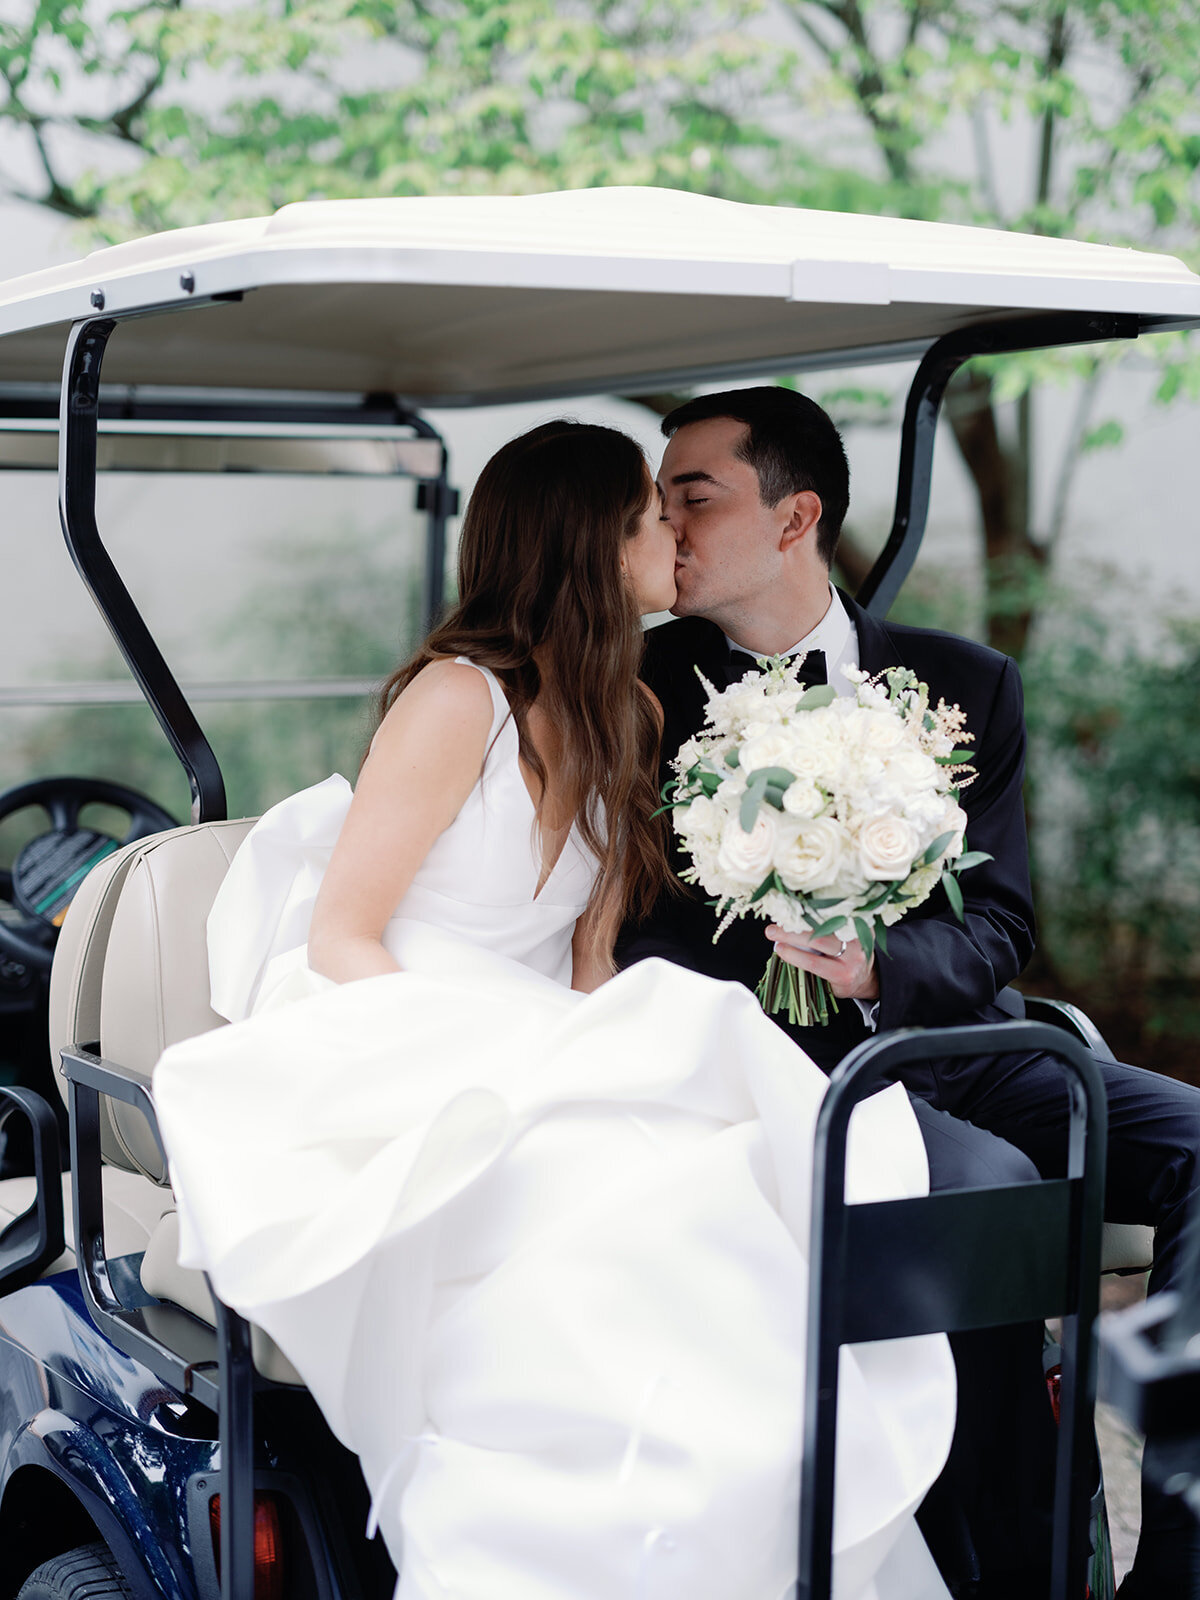 Bride and groom kiss while sitting on a golf cart